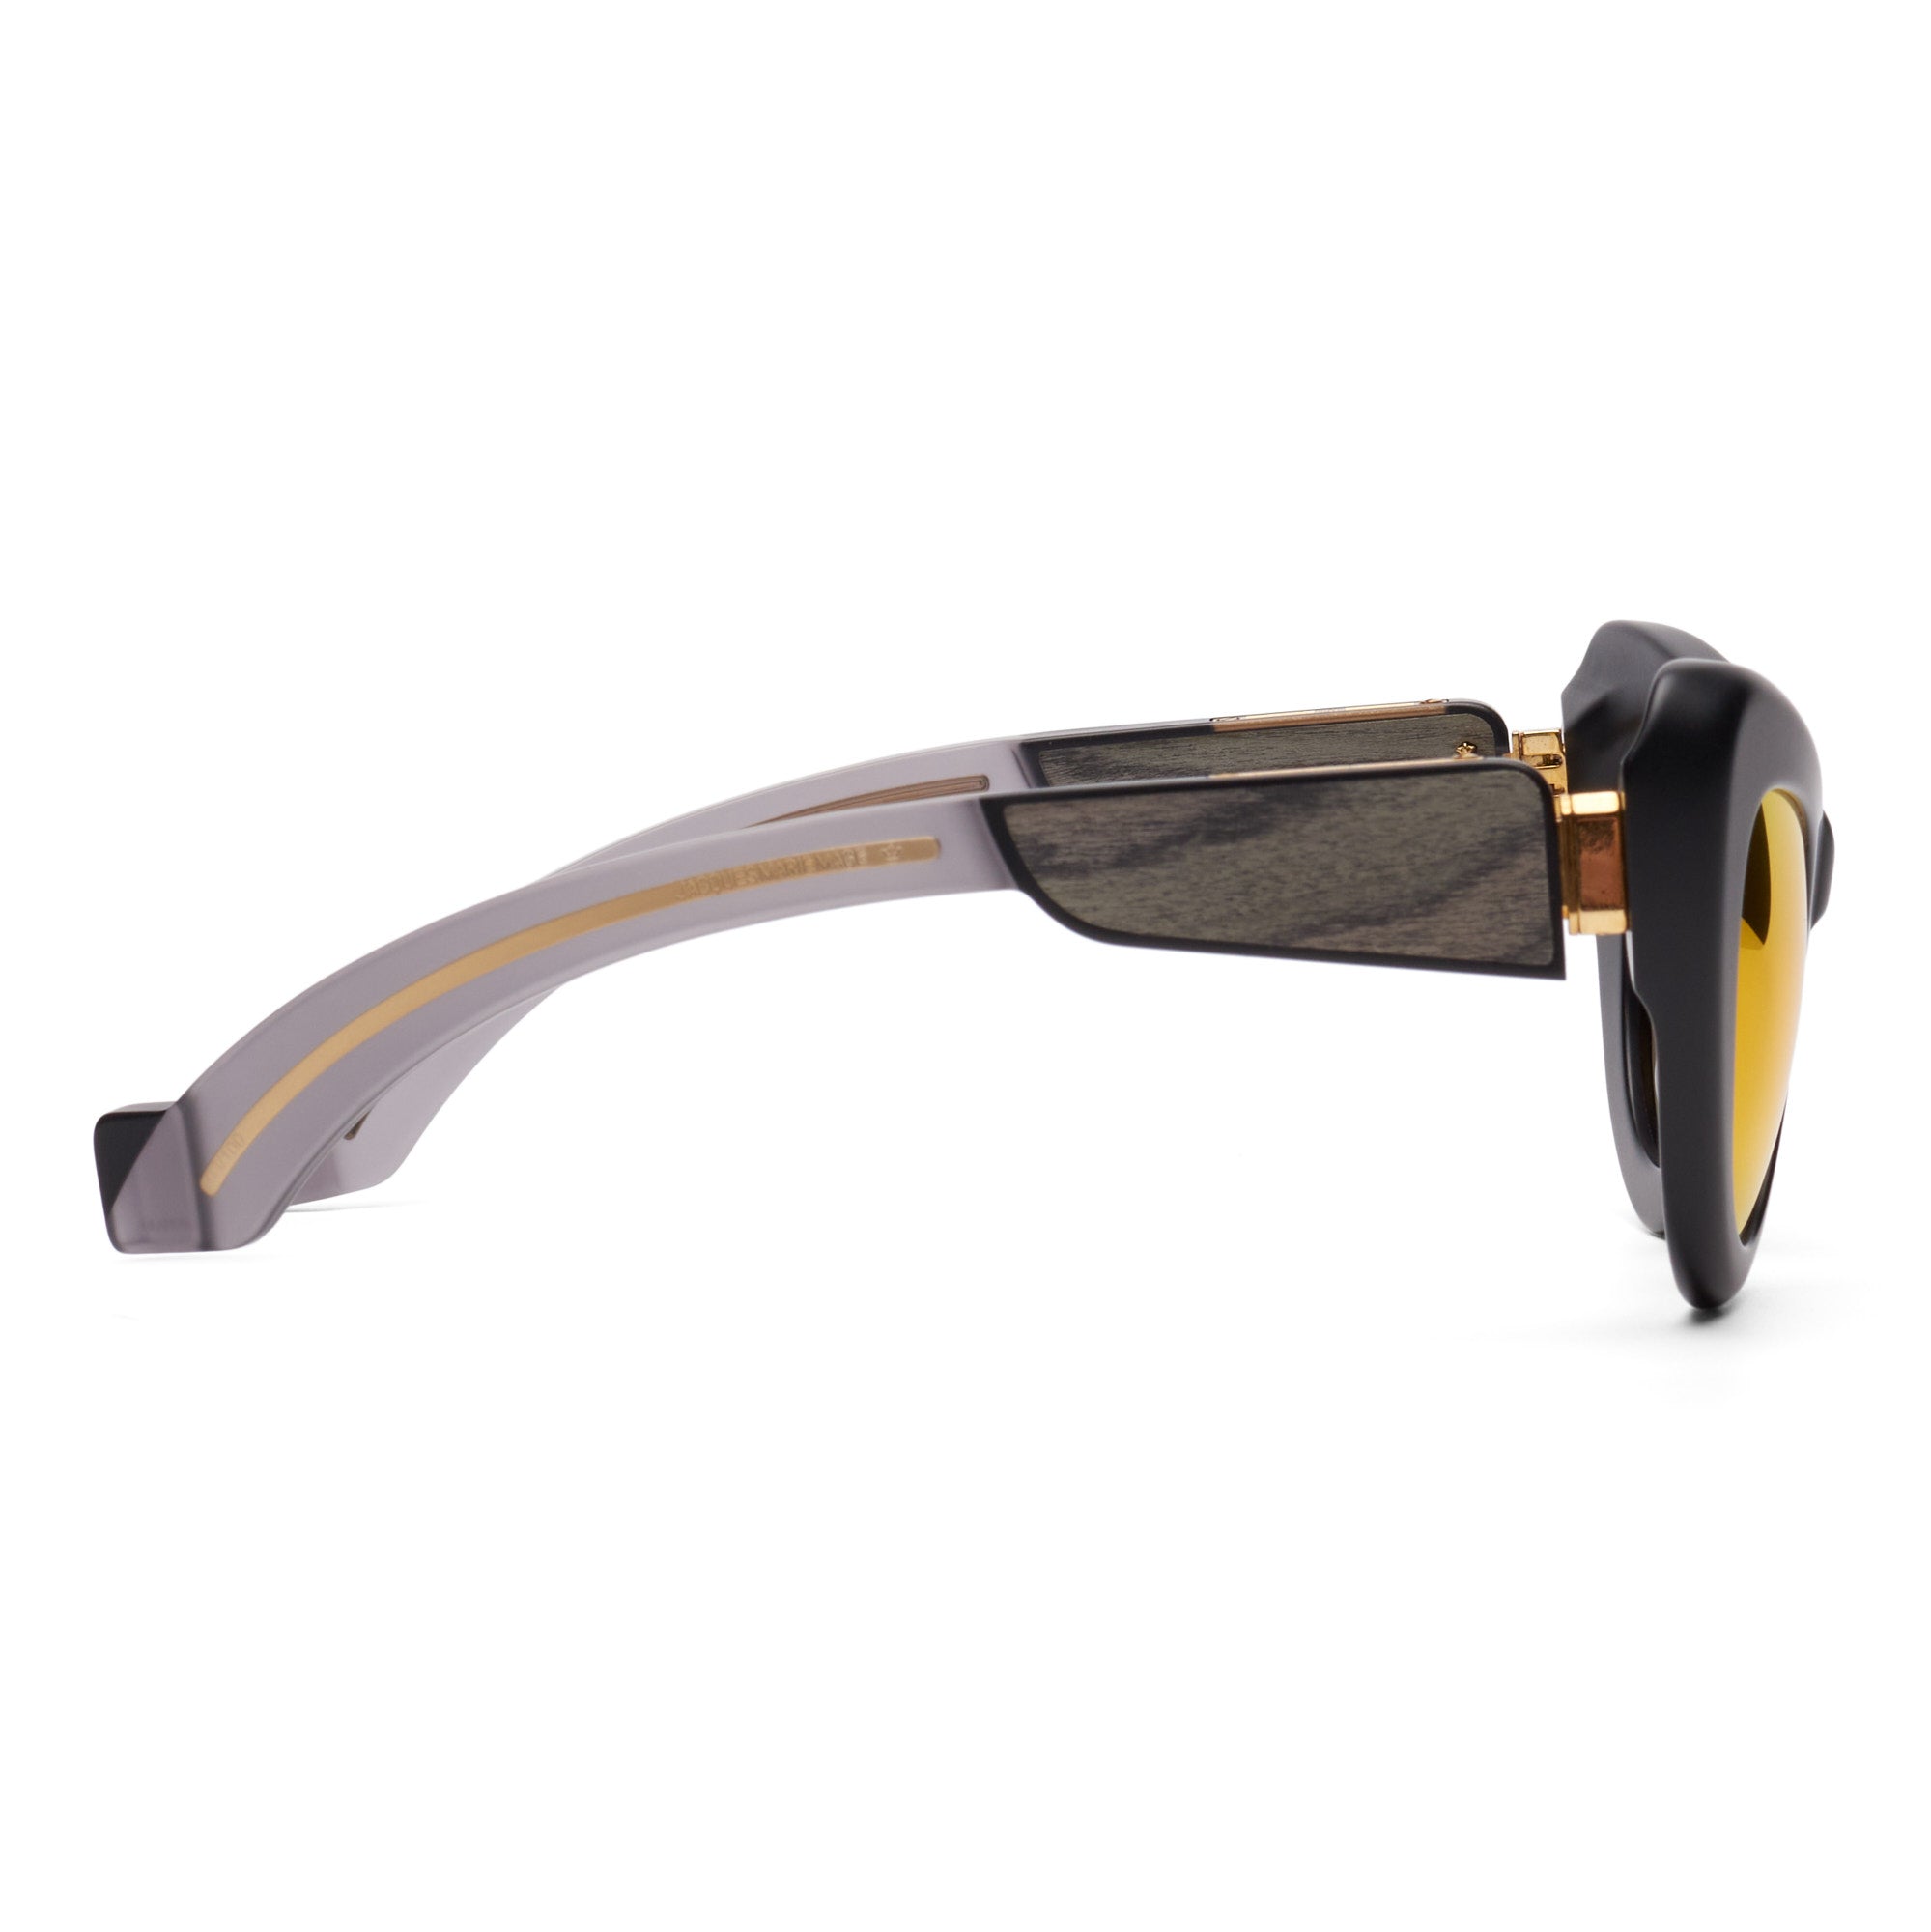 JACQUES MARIE MAGE "Olympe" JMMOL-02 Limited Edition 03/100 Sunglasses NEW JACQUES MARIE MAGE